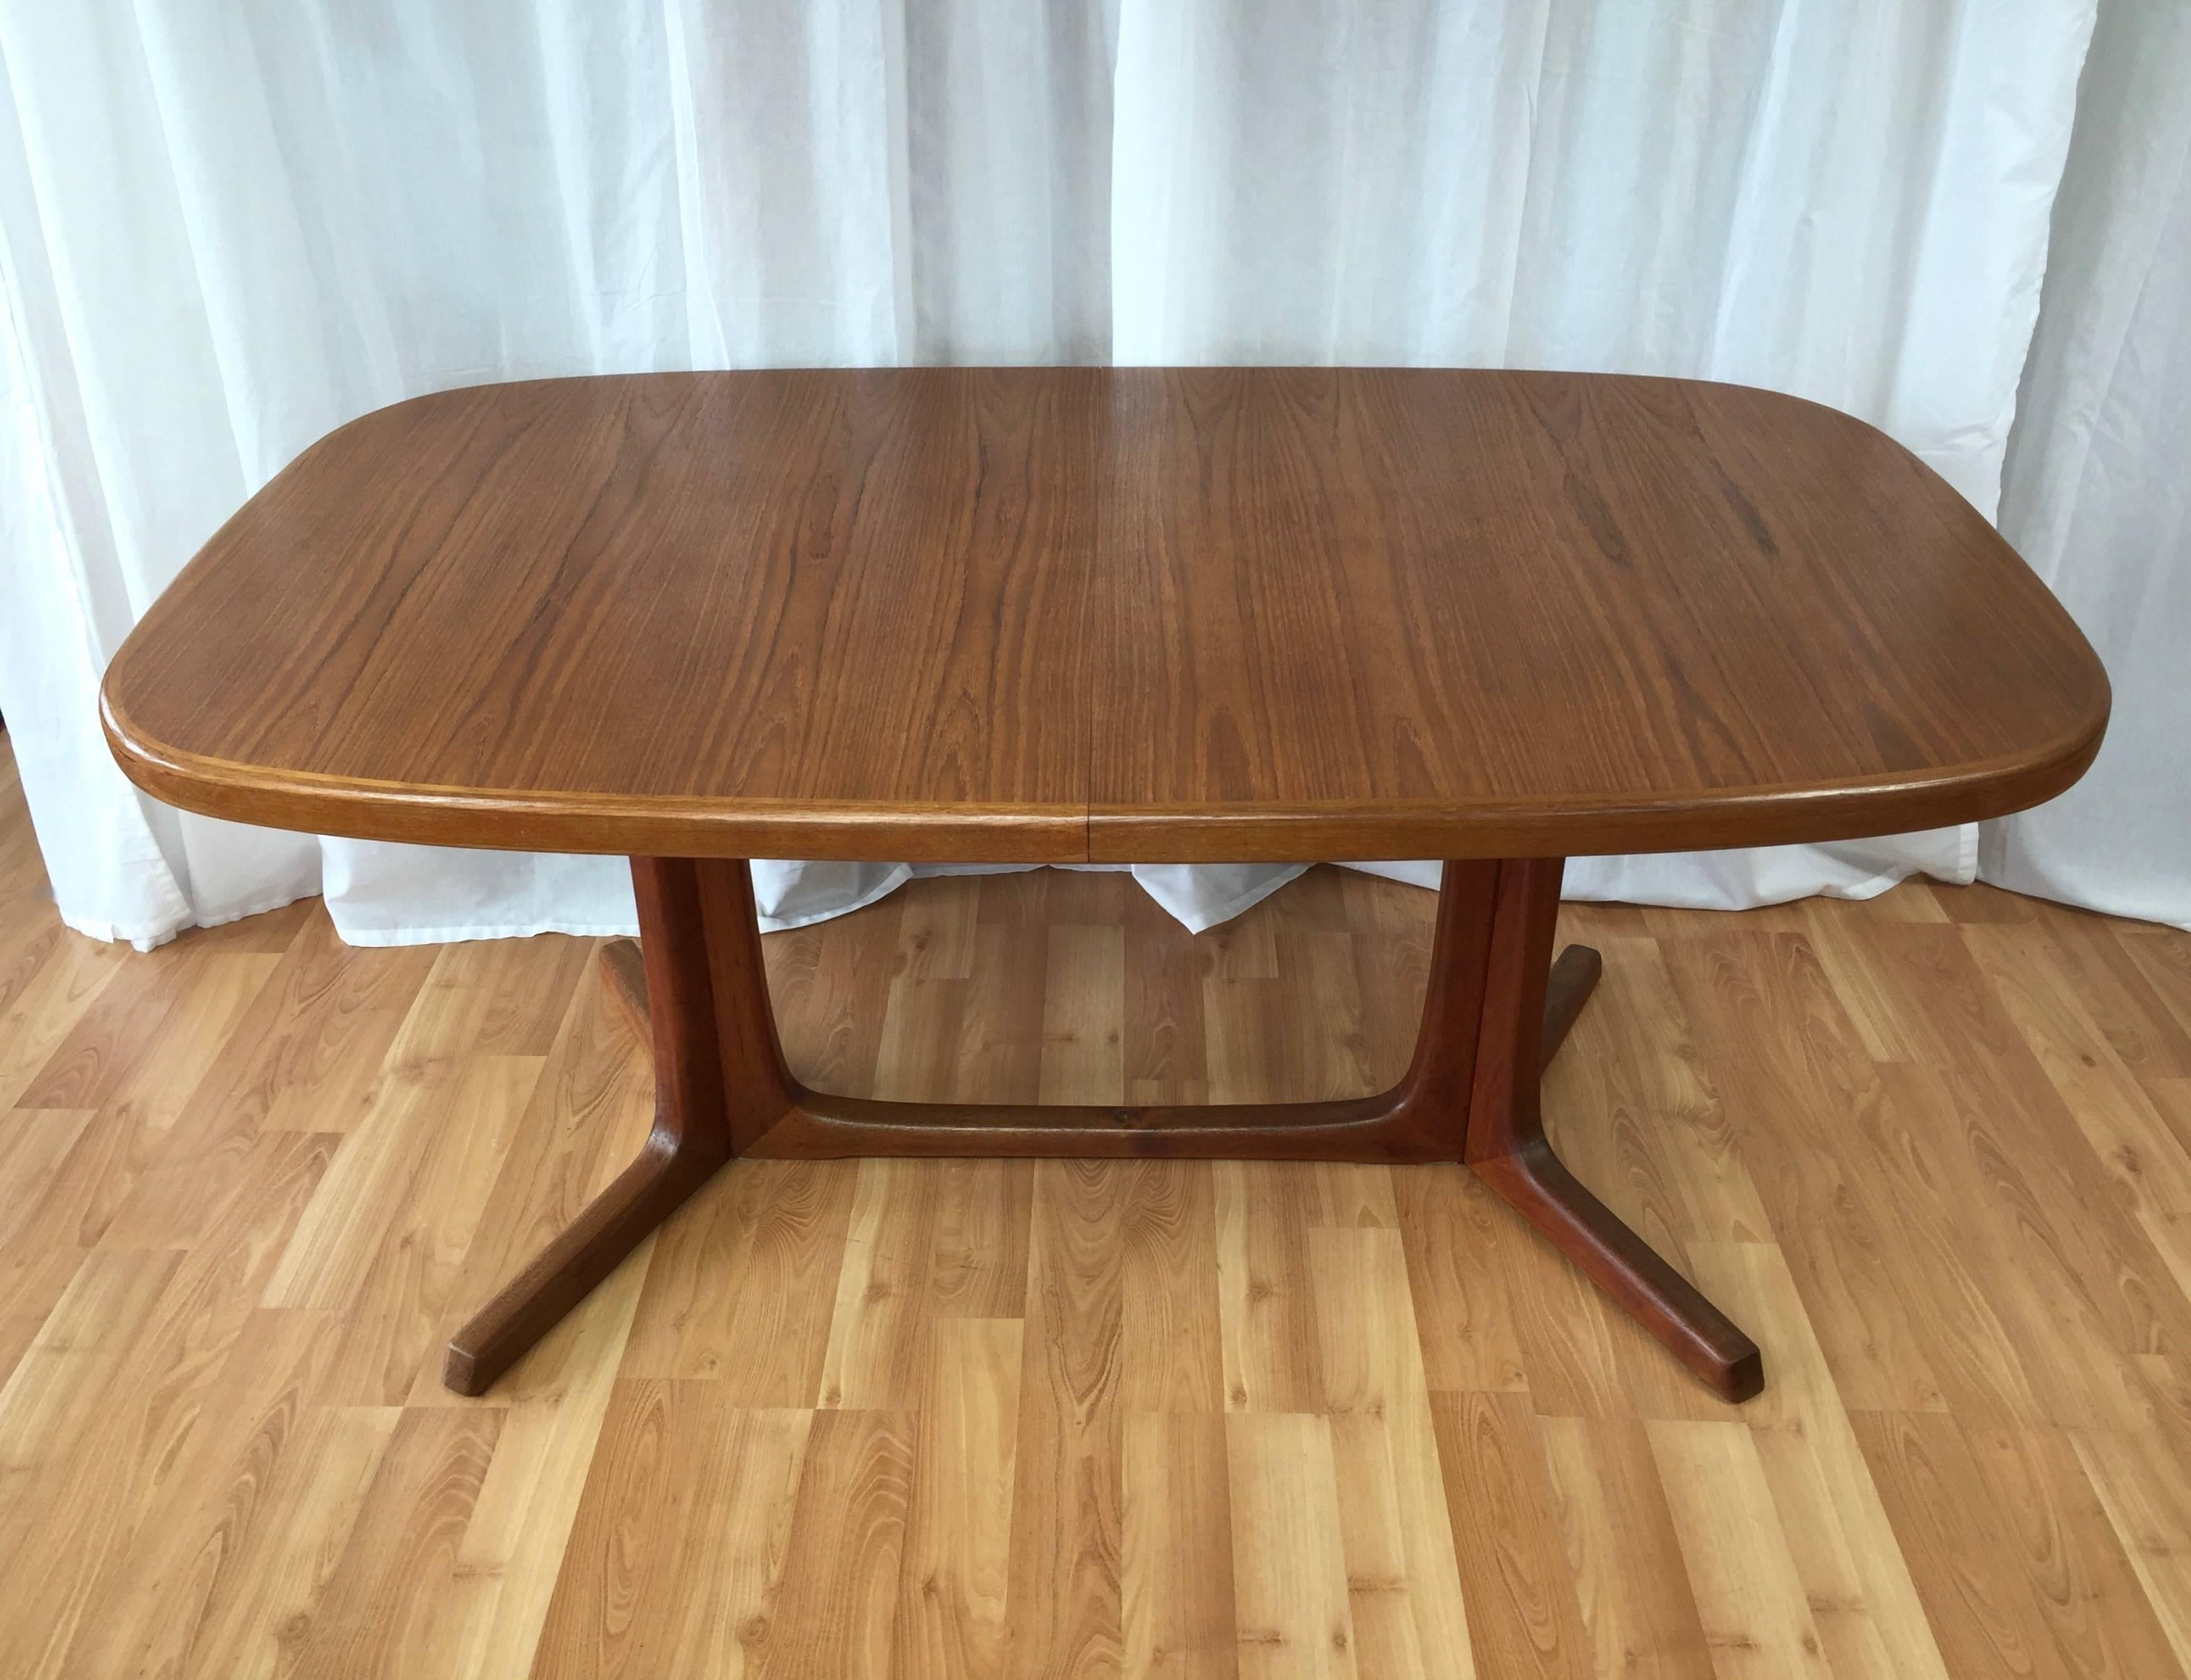 A Classic Danish modern dining table with two leaves by Niels Moller.

Substantial teak top, thick legs, and splayed feet offer a sturdy dining surface distinguished by it’s warm, lively grain. Slides apart to accommodate one or two additional